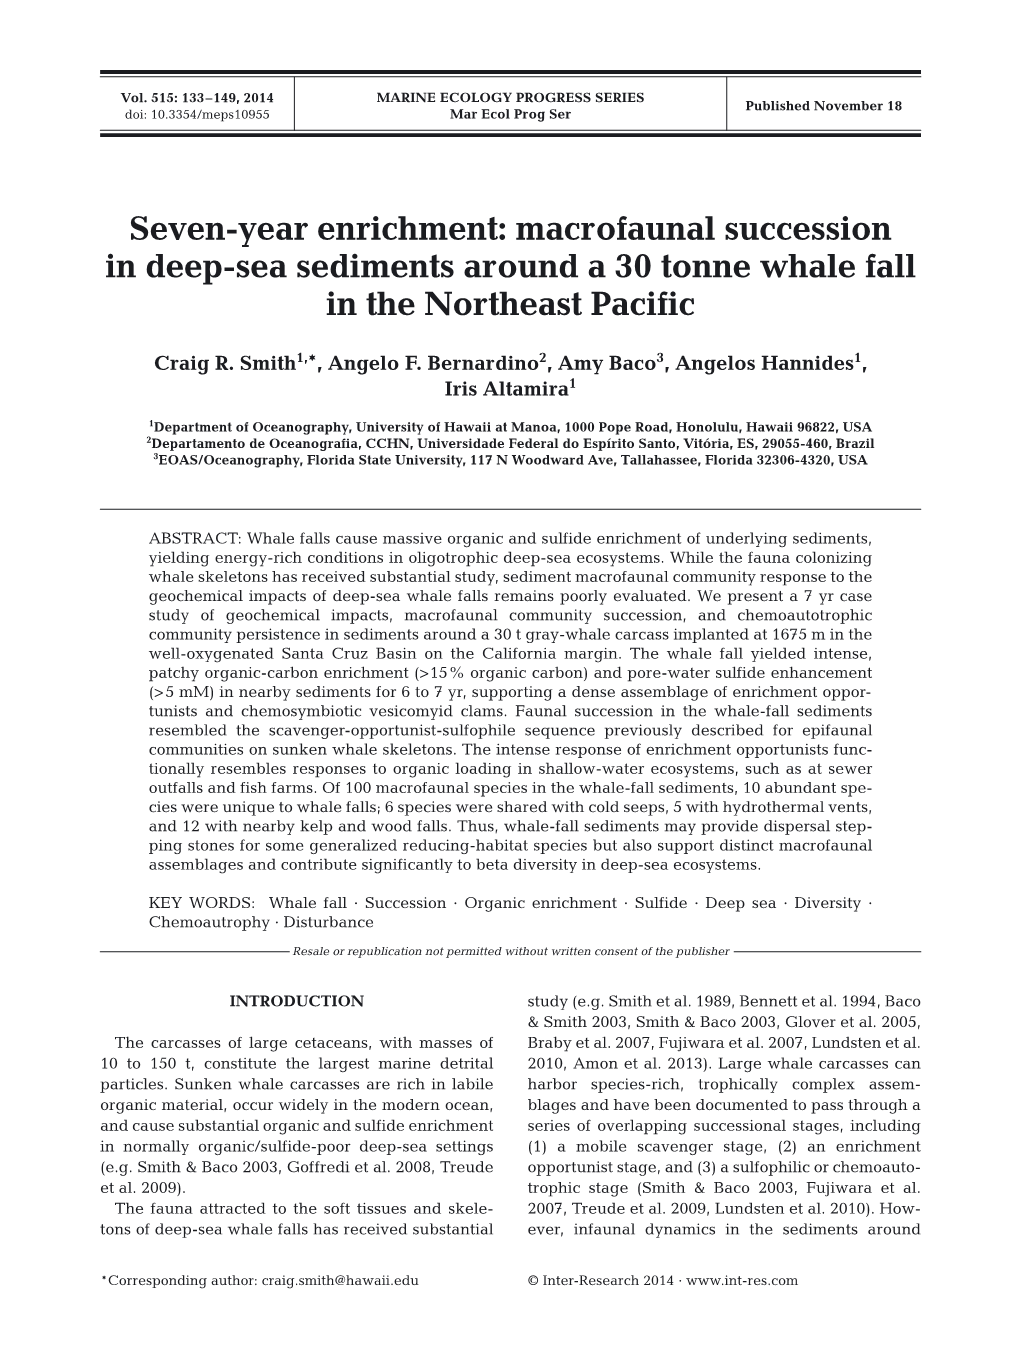 Seven-Year Enrichment: Macrofaunal Succession in Deep-Sea Sediments Around a 30 Tonne Whale Fall in the Northeast Pacific